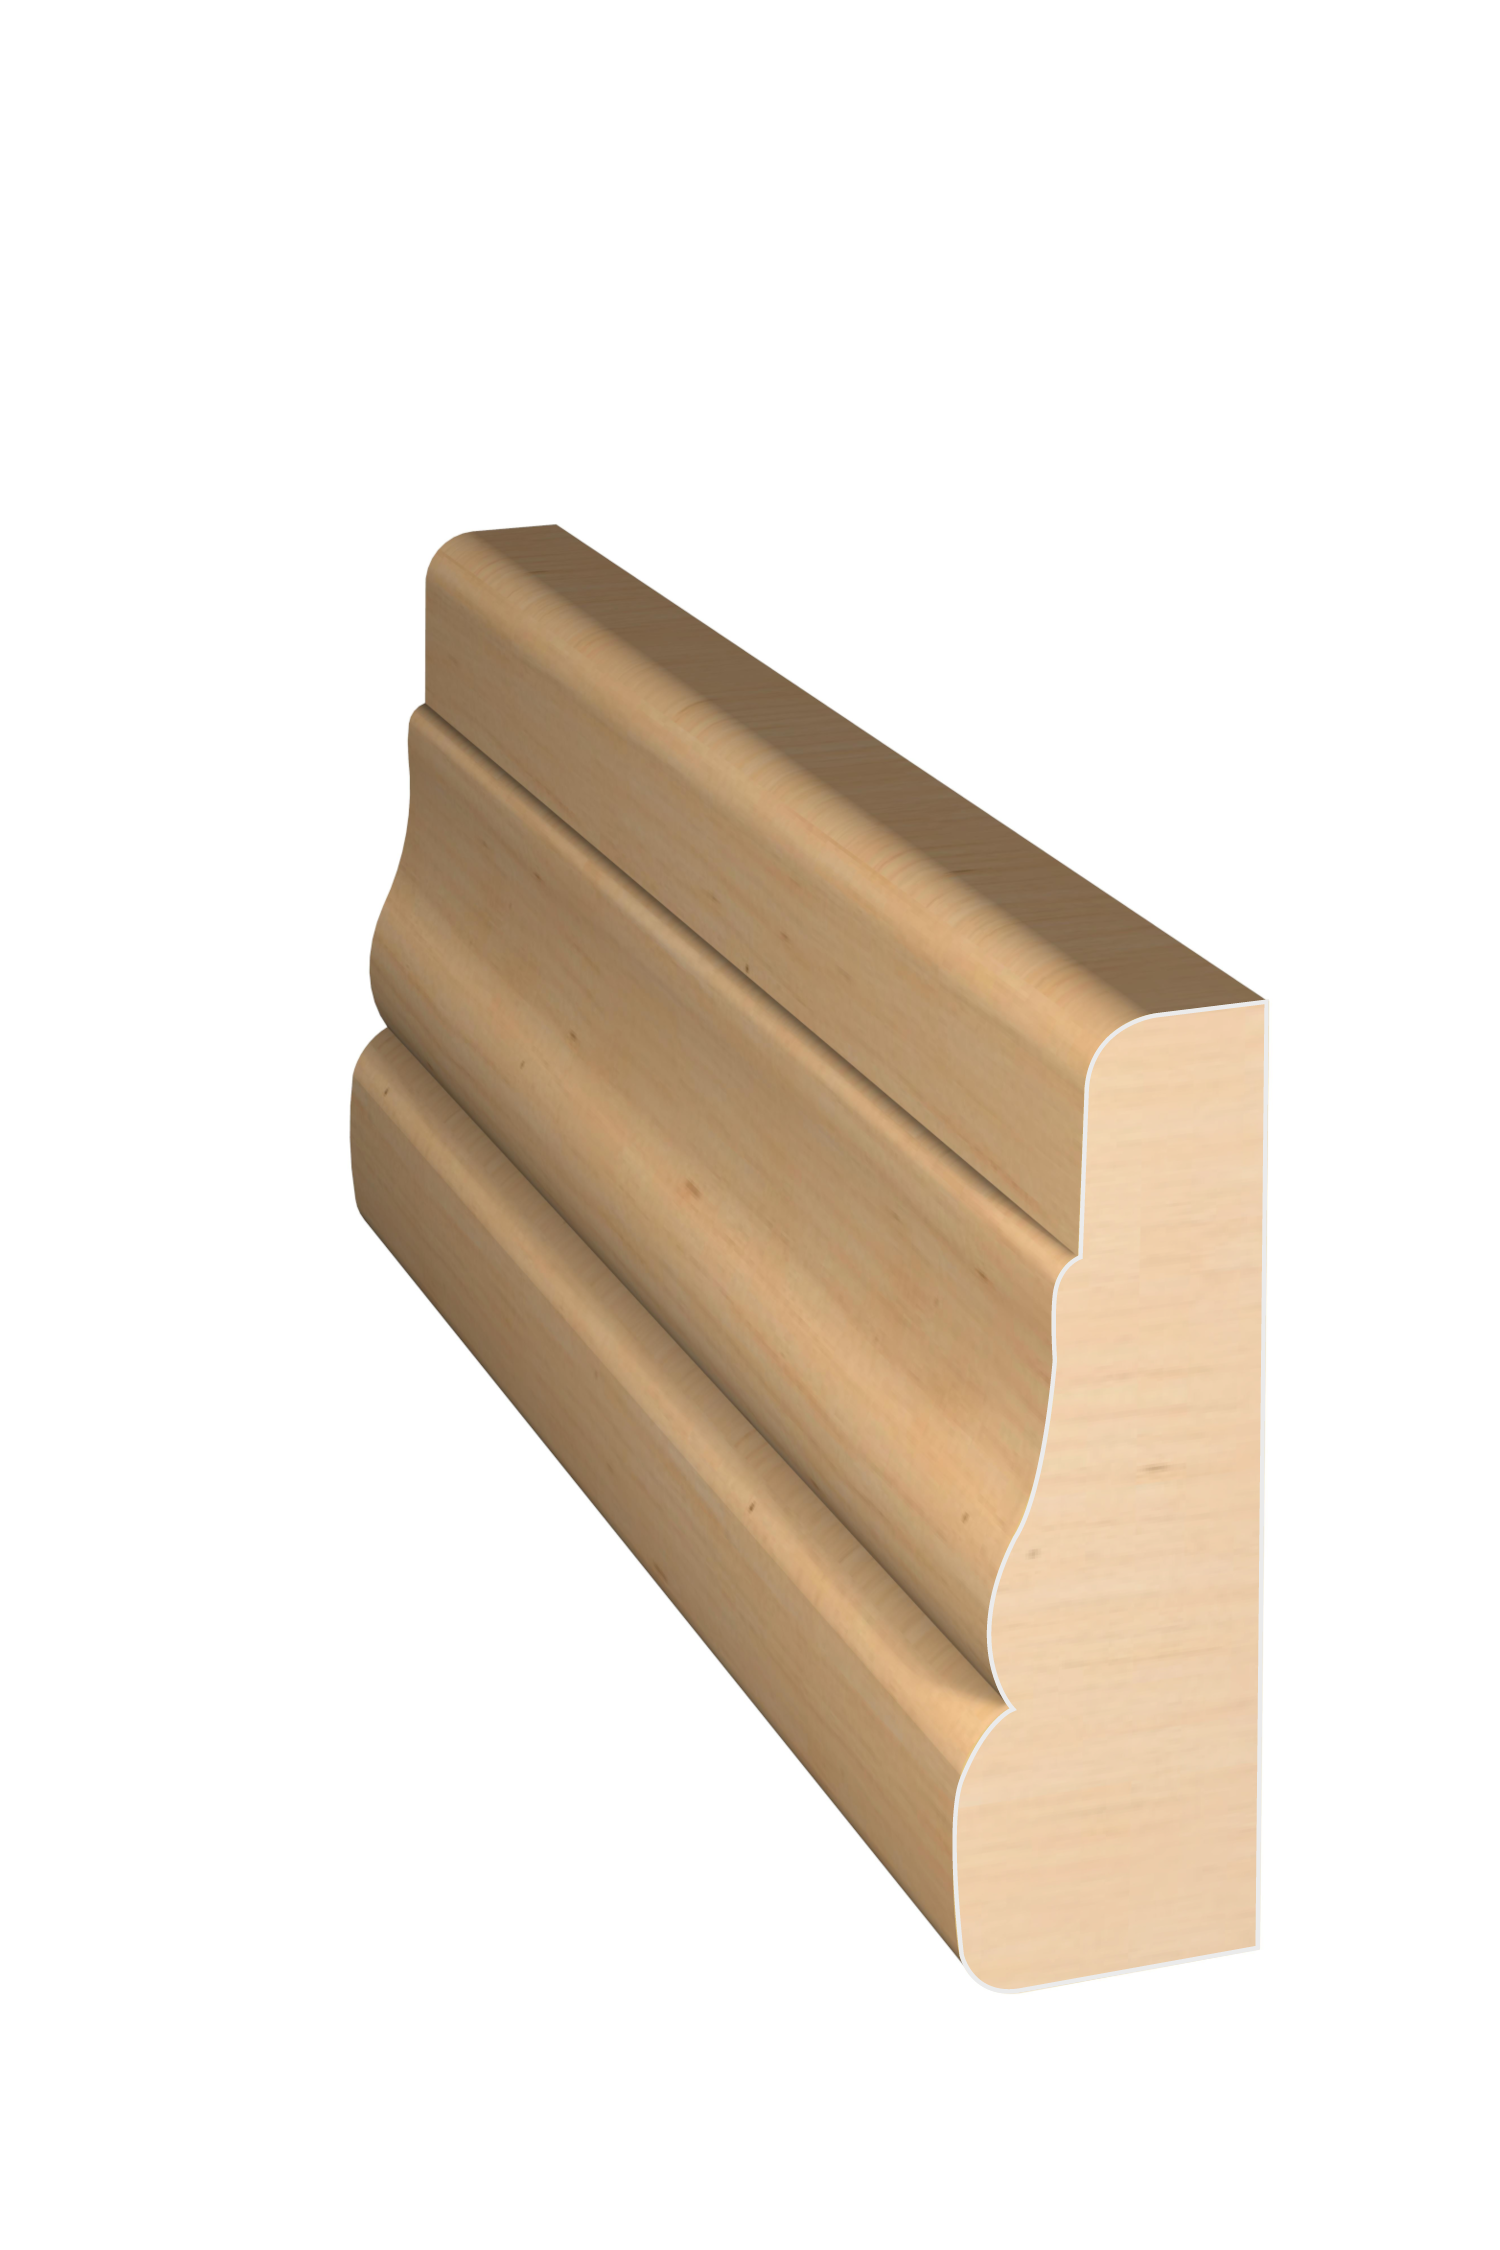 Three dimensional rendering of custom casing wood molding CAPL21212 made by Public Lumber Company in Detroit.